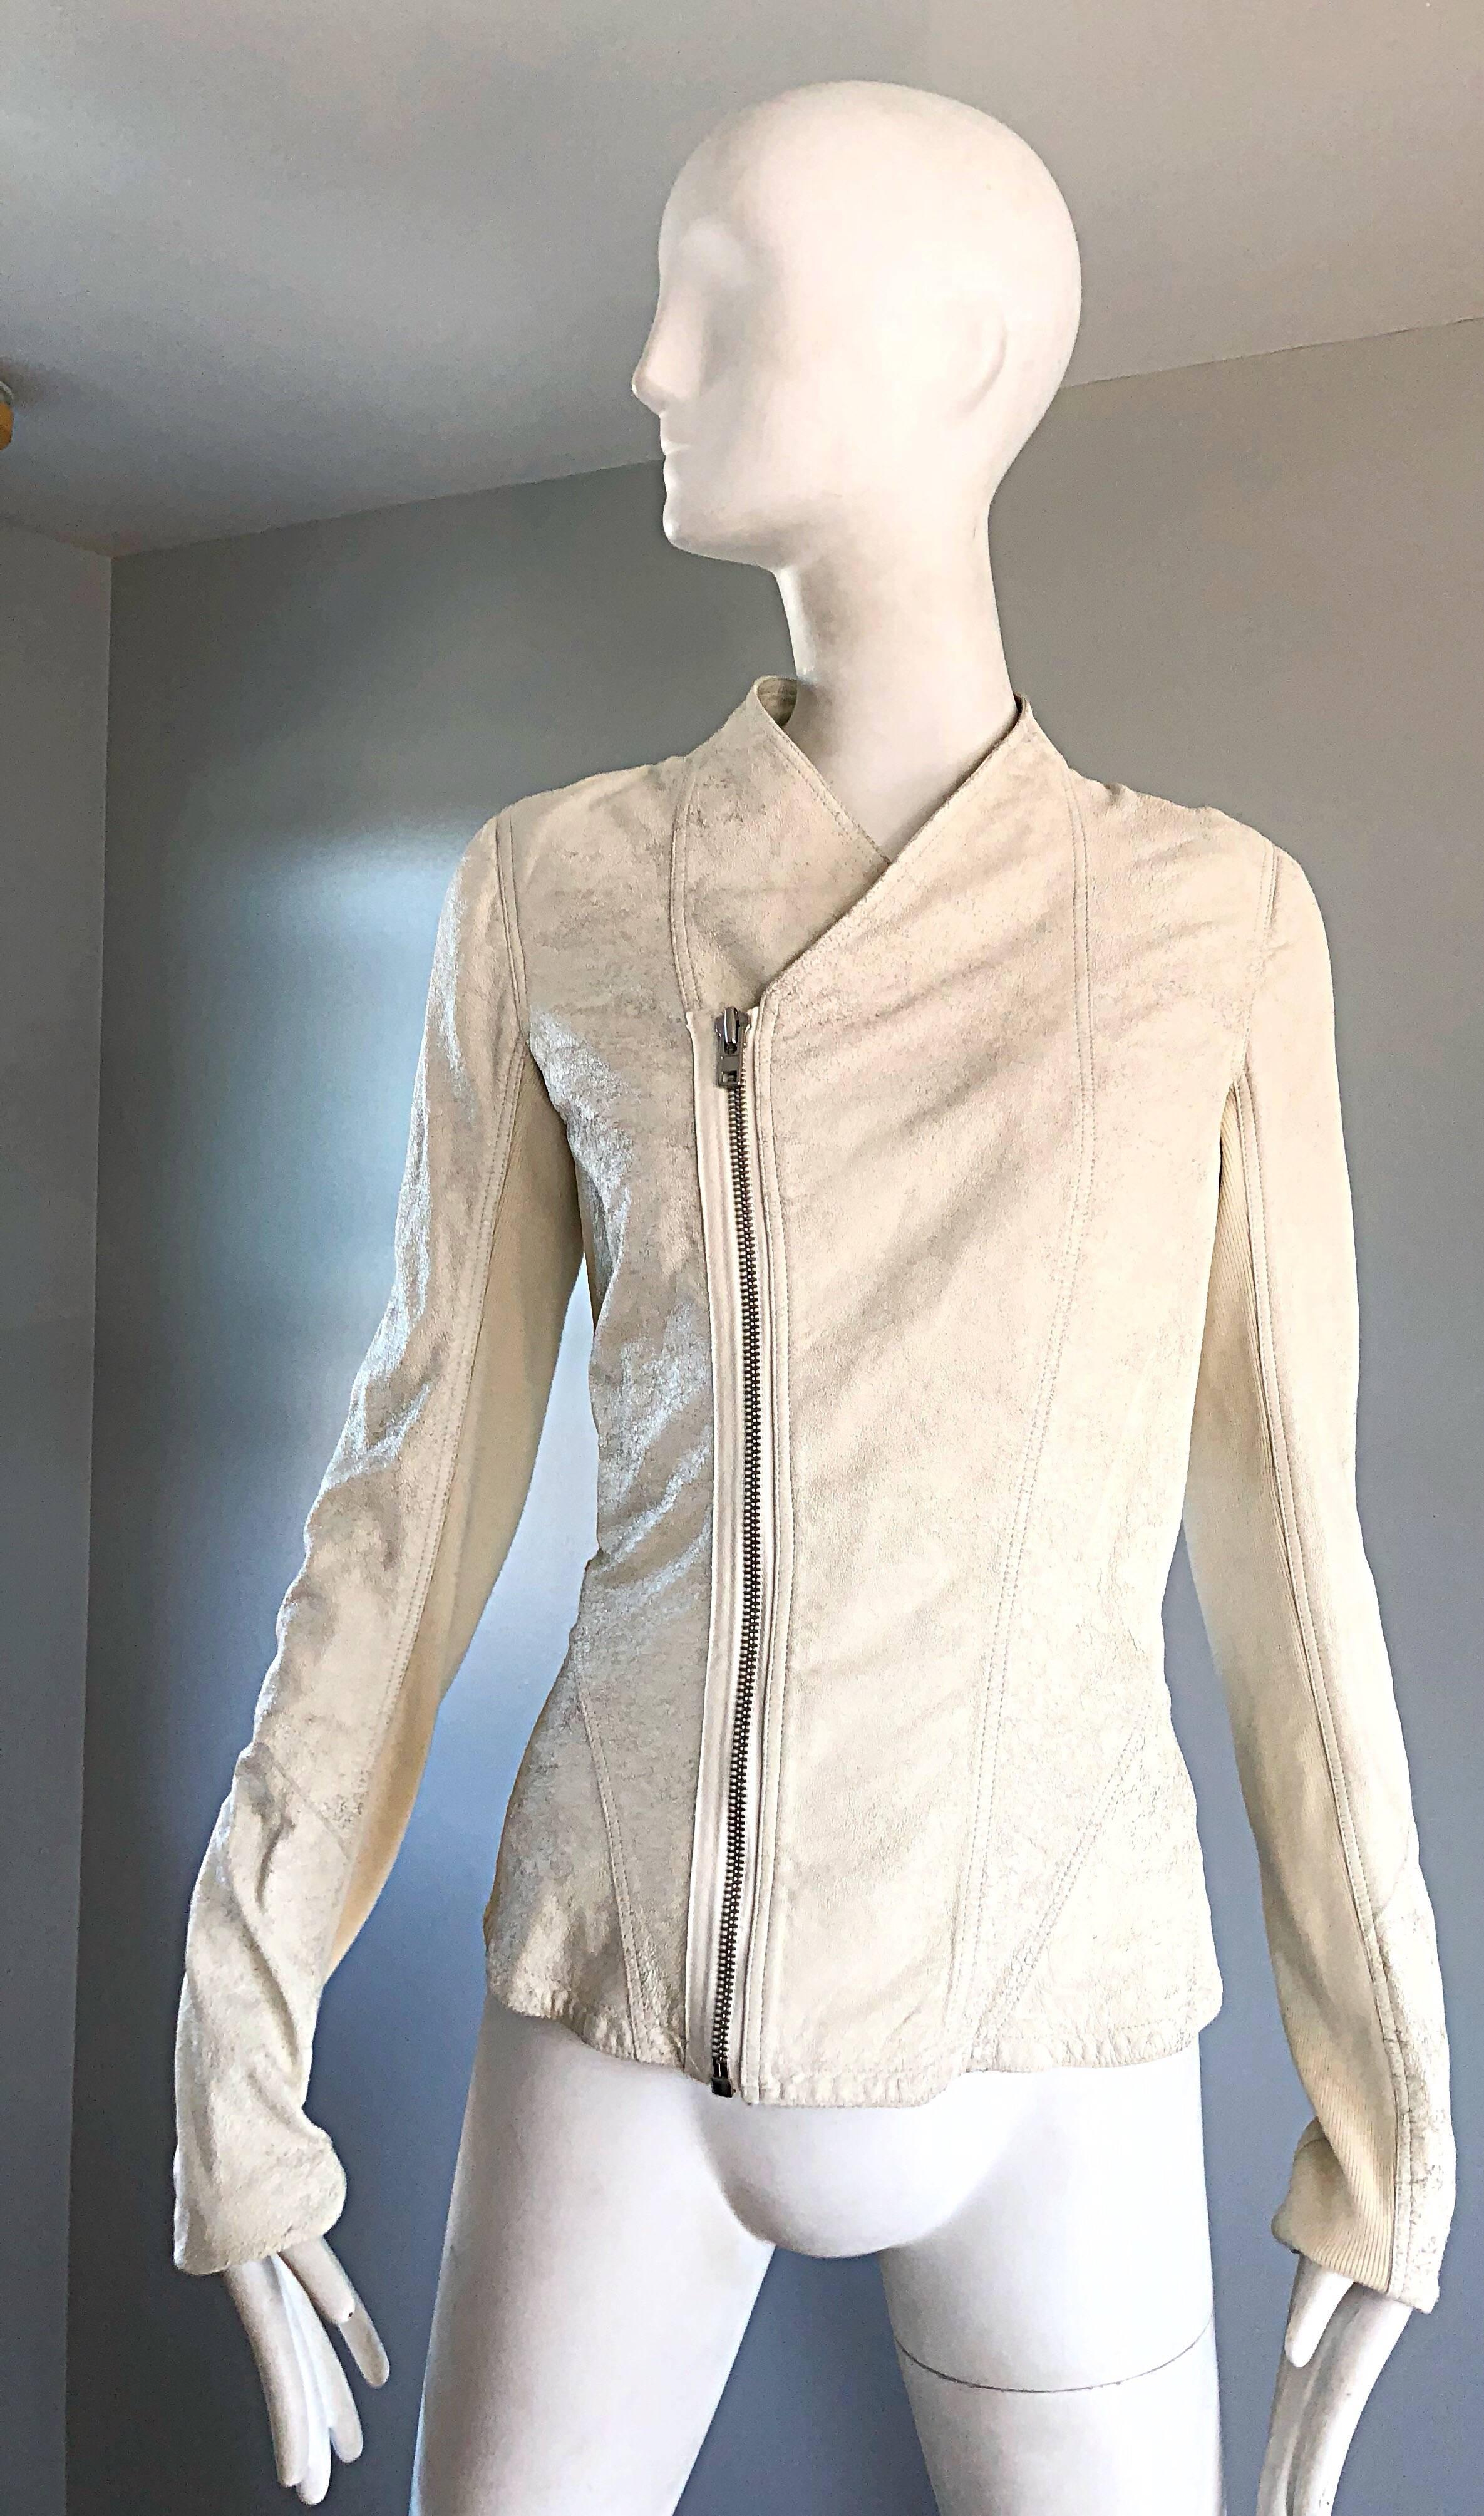 Brand new RICK OWENS off-white ivory ecru distressed leather moto jacket! No one does such miraculous work with leather than Rick Owens, and this lovely piece is a prime example! Features a classic motorcycle tailored fit. Full silver metal zipper